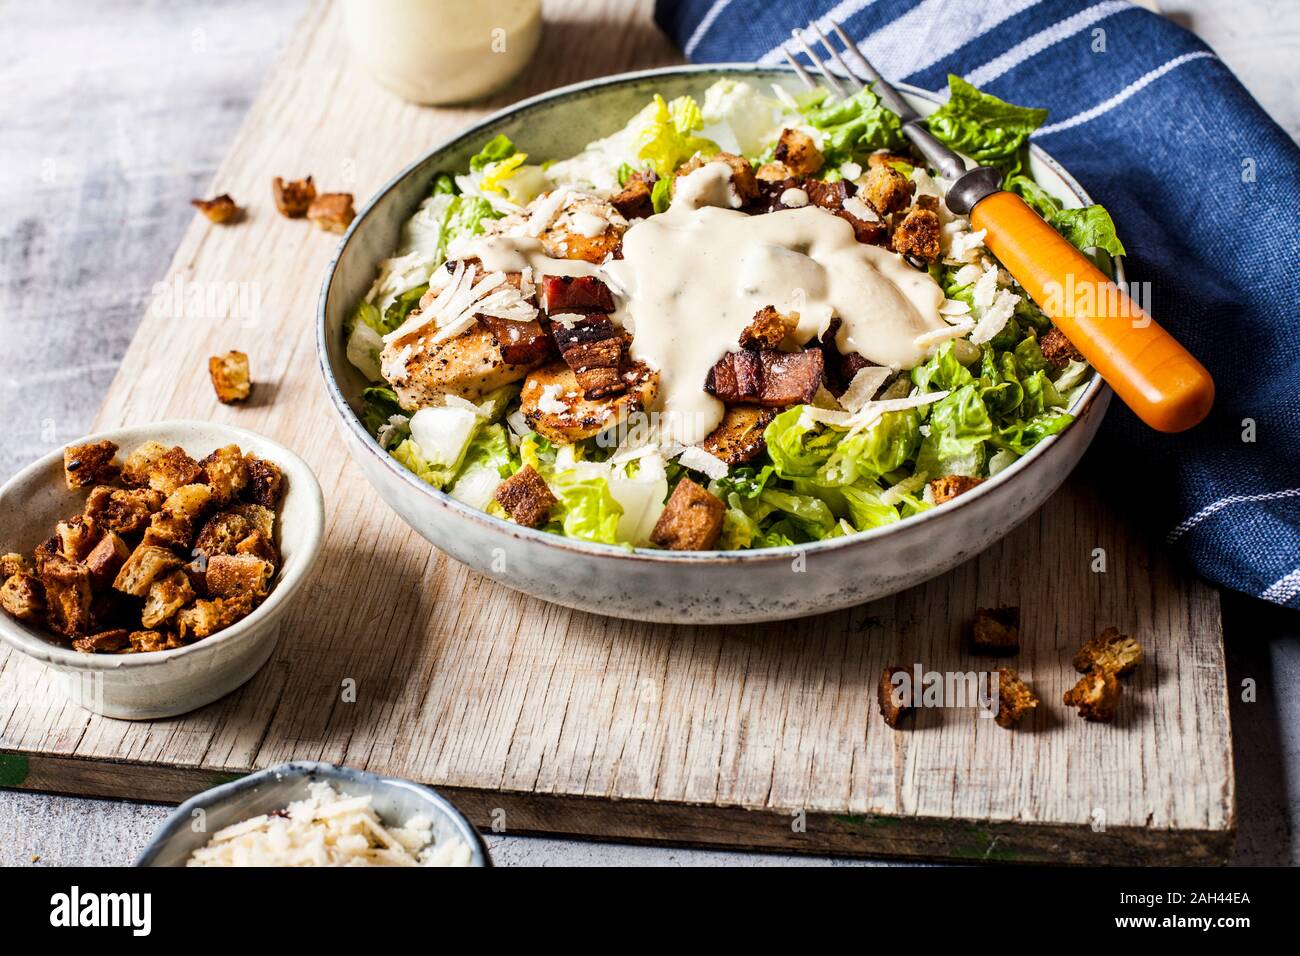 Bowl of Caesar salad with romaine lettuce, Parmesan cheese, bacon, chicken breast and croutons Stock Photo